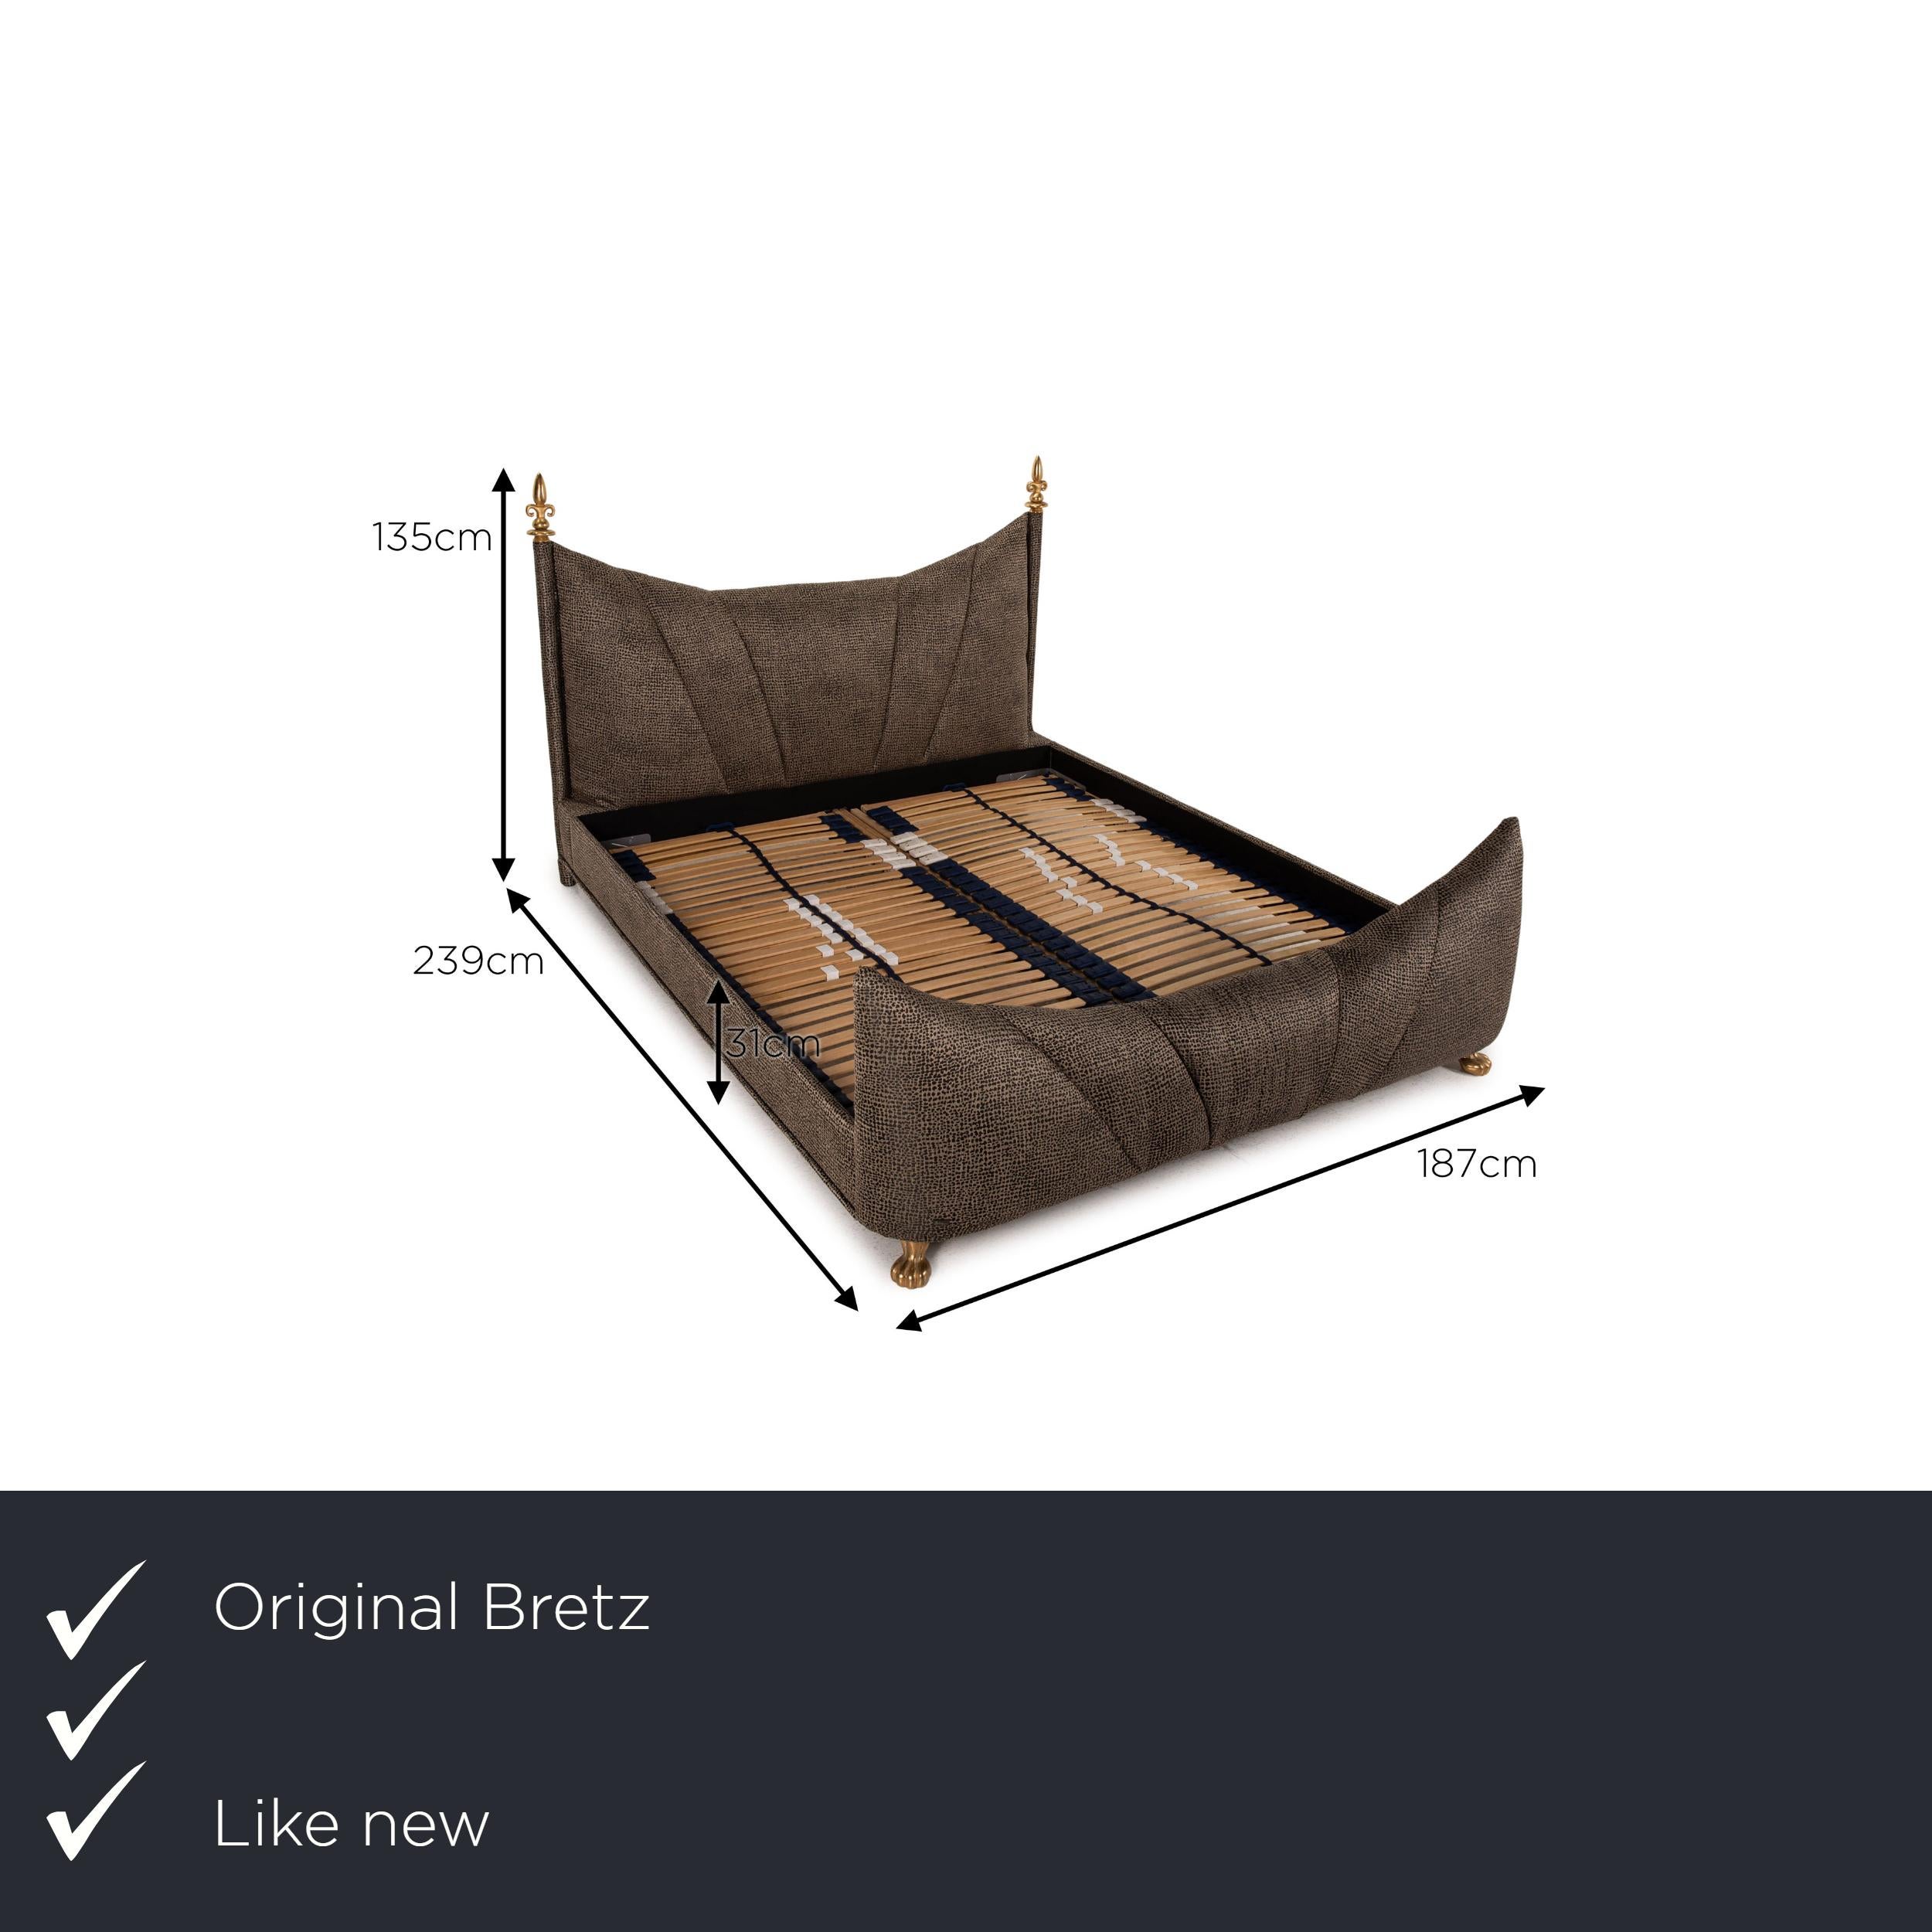 We present to you a Bretz Ali Baba velvet bed brown double bed.
  
 

 Product measurements in centimeters:
 

 depth: 239
 width: 187
 height: 135
 seat height: 31.



 